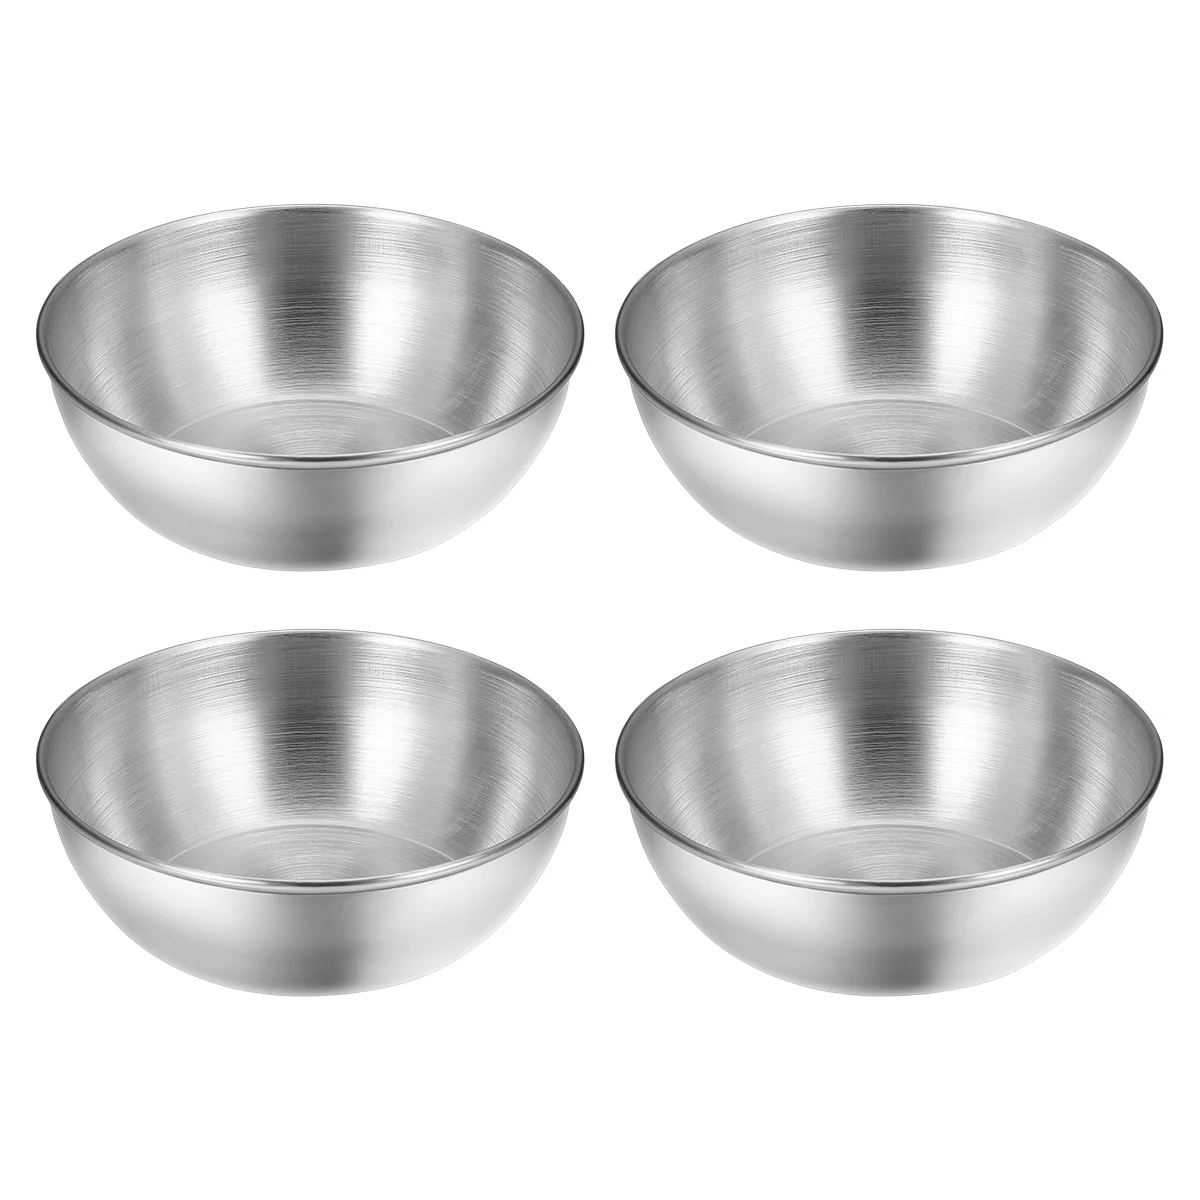 

4pcs Stainless Steel Sauce Dishes Round Seasoning Dishes Sushi Dipping Bowl Saucers Bowl Appetizer Plates Saucer Plates